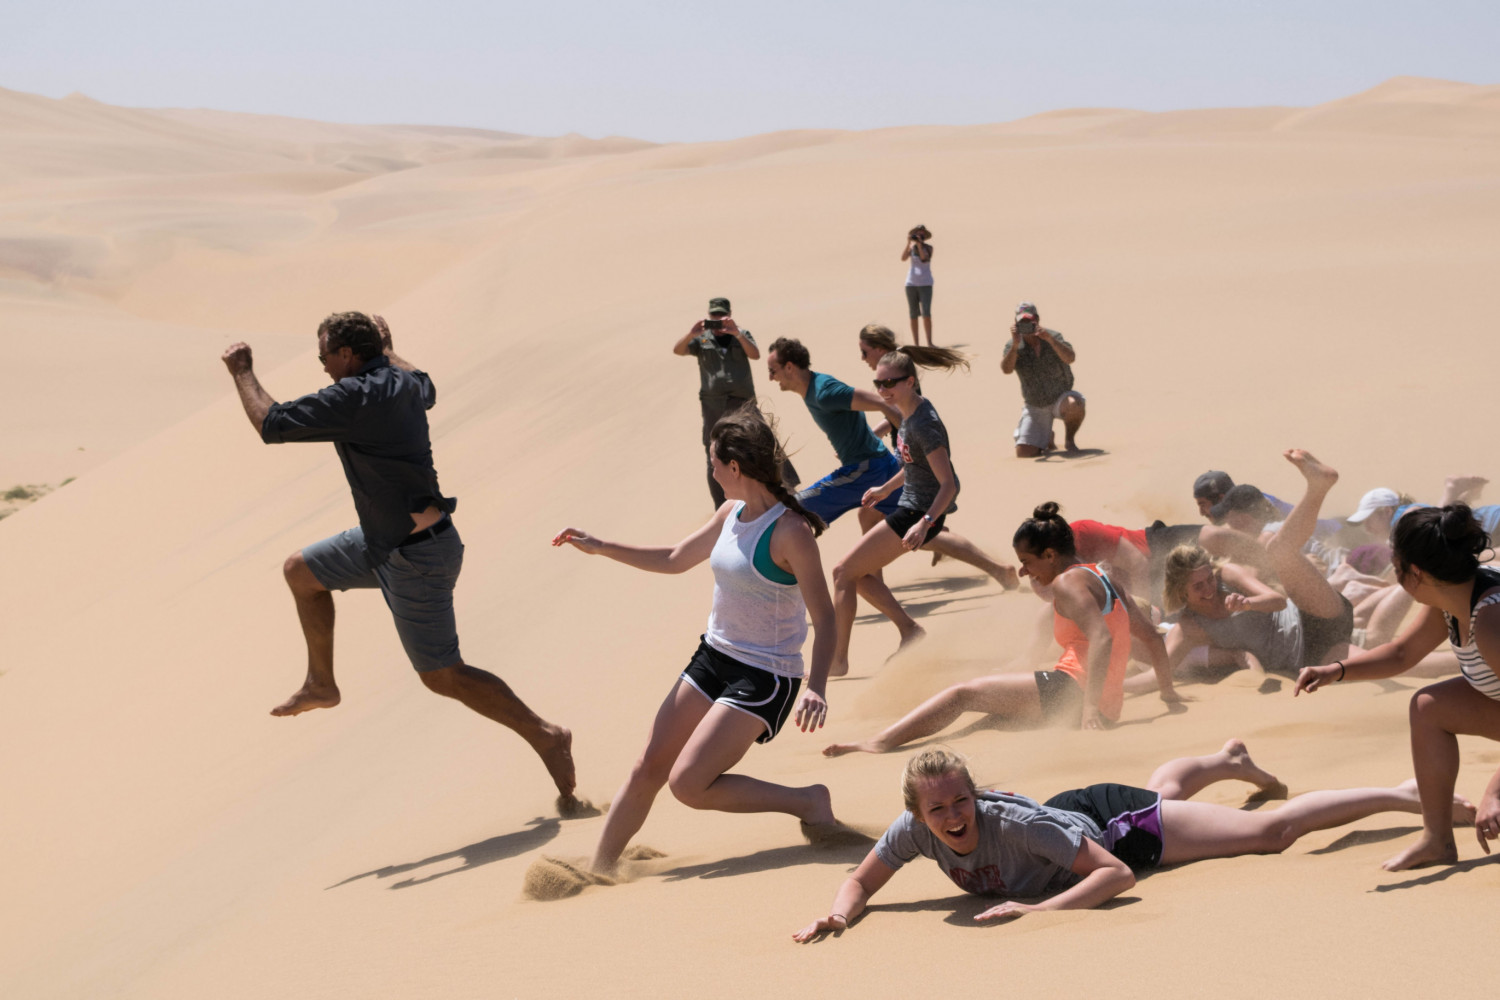 A Sociocultural Journey: This regular J-Term study tour takes students to Namibia.